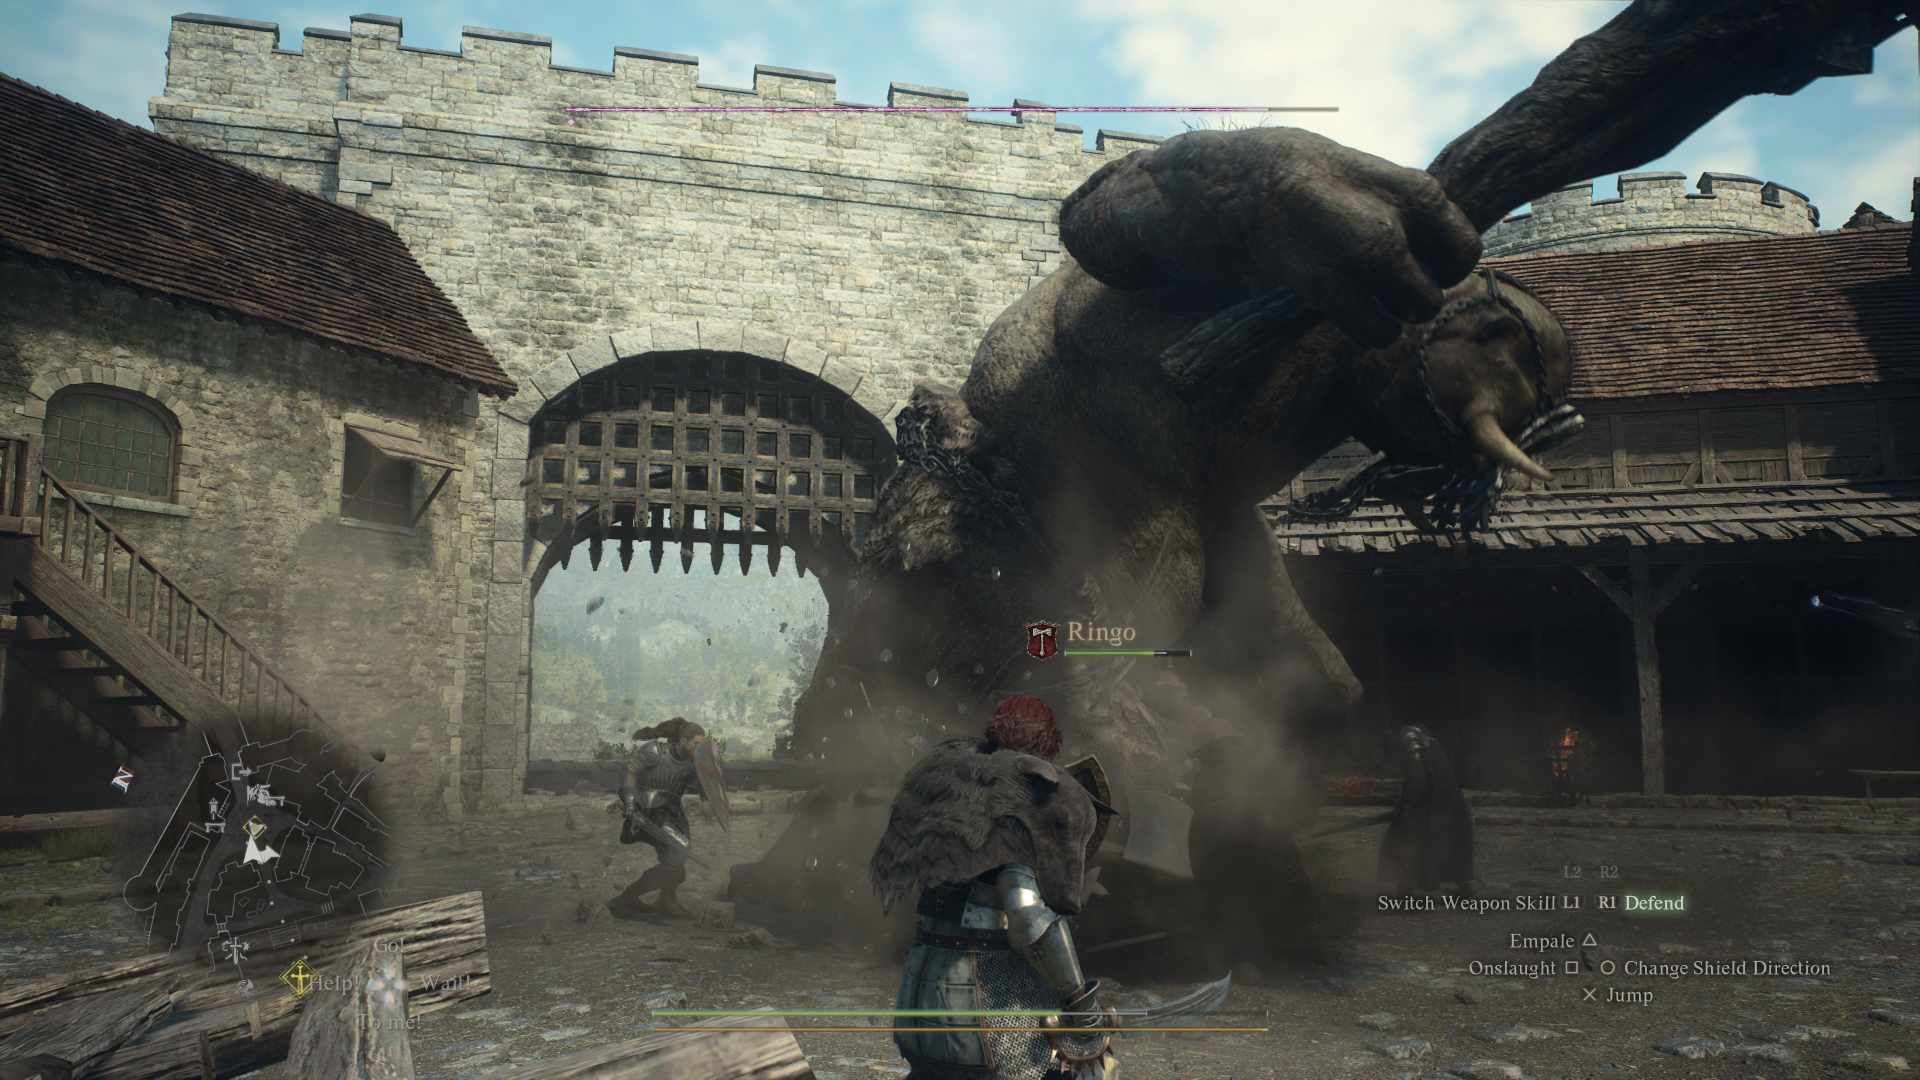 Cyclops attacking Vernworth in Dragon's Dogma 2